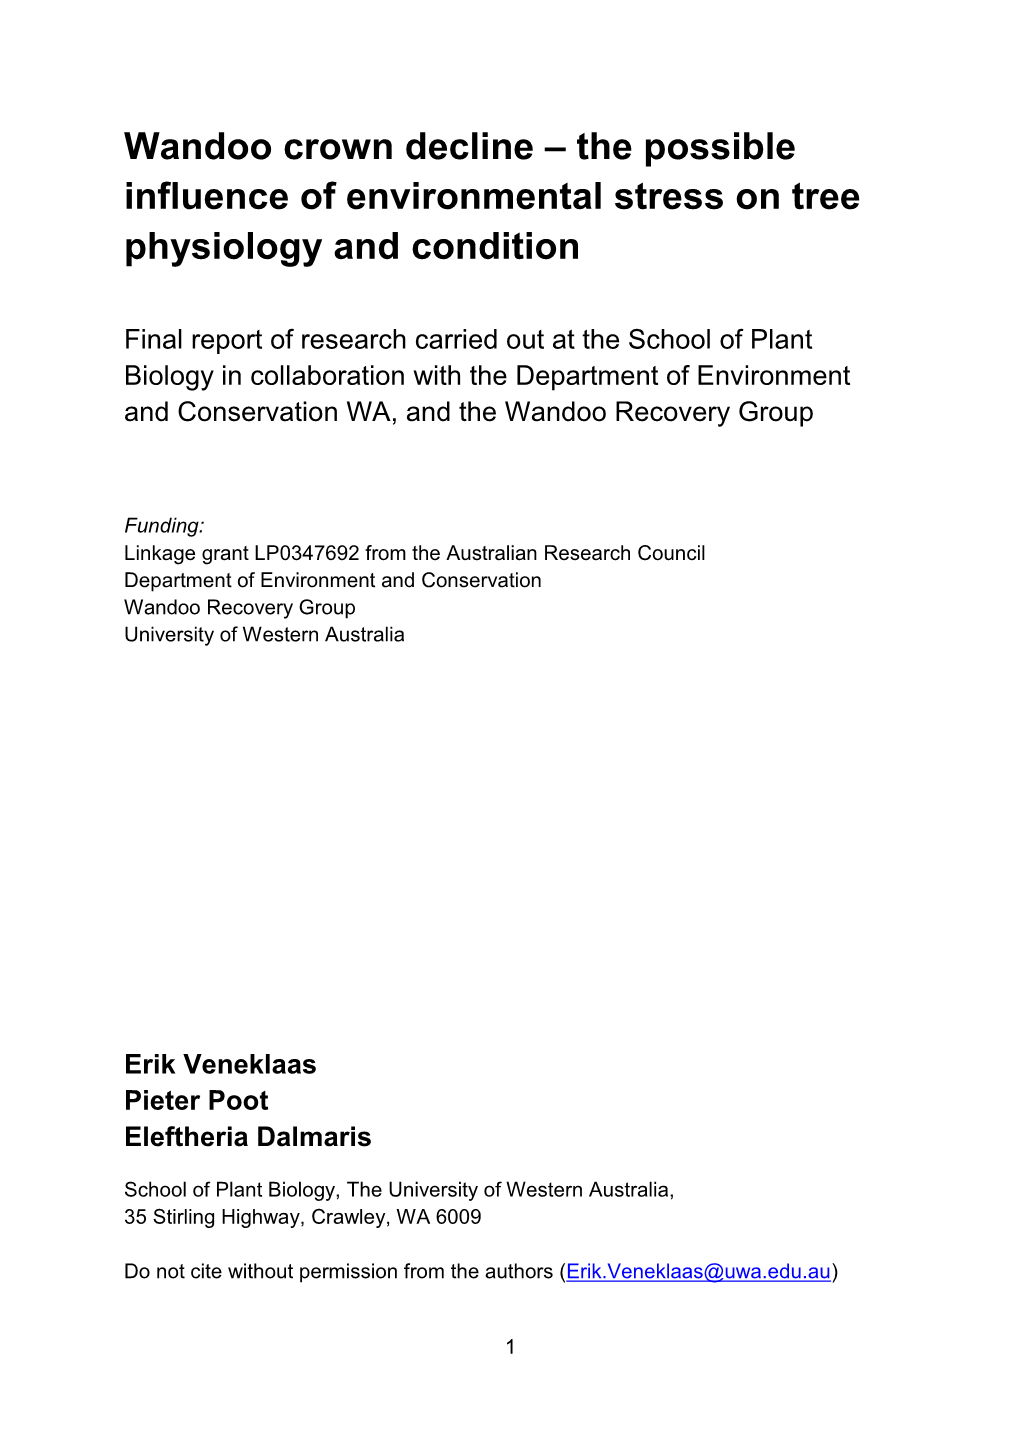 Wandoo Crown Decline – the Possible Influence of Environmental Stress on Tree Physiology and Condition